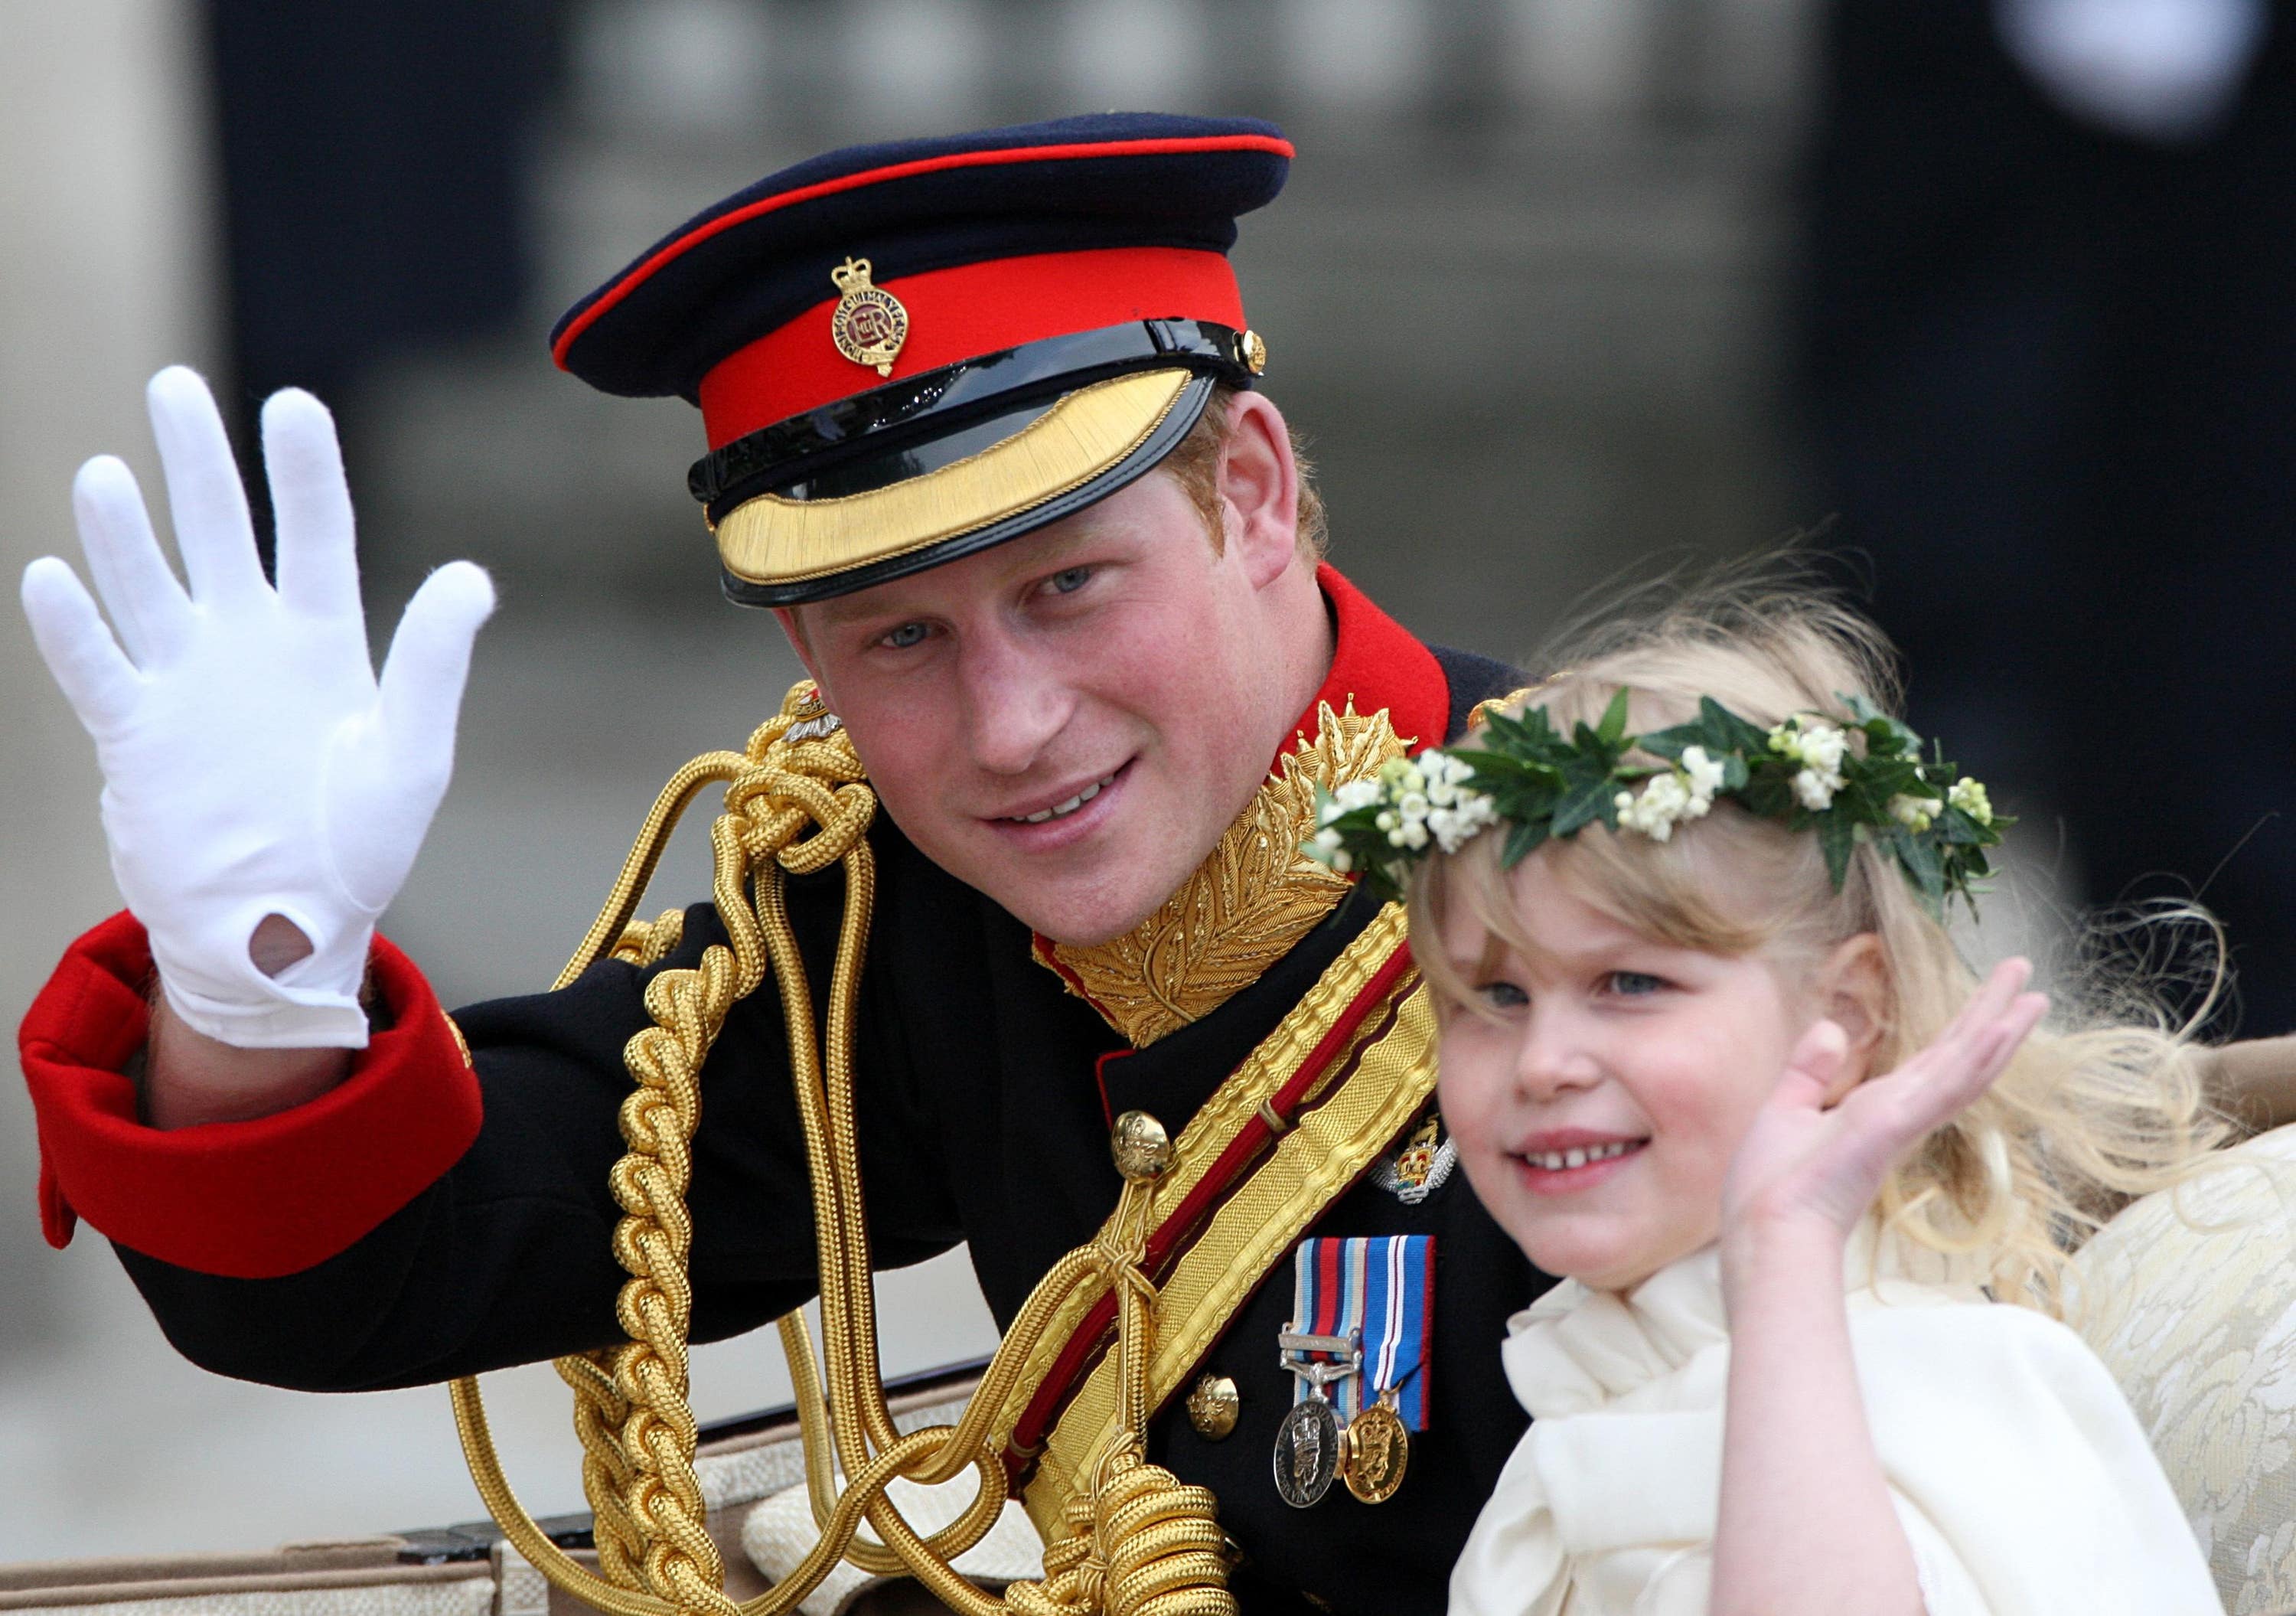 Prince Harry waves to the crowds with Louise after the Cambridges’ wedding.